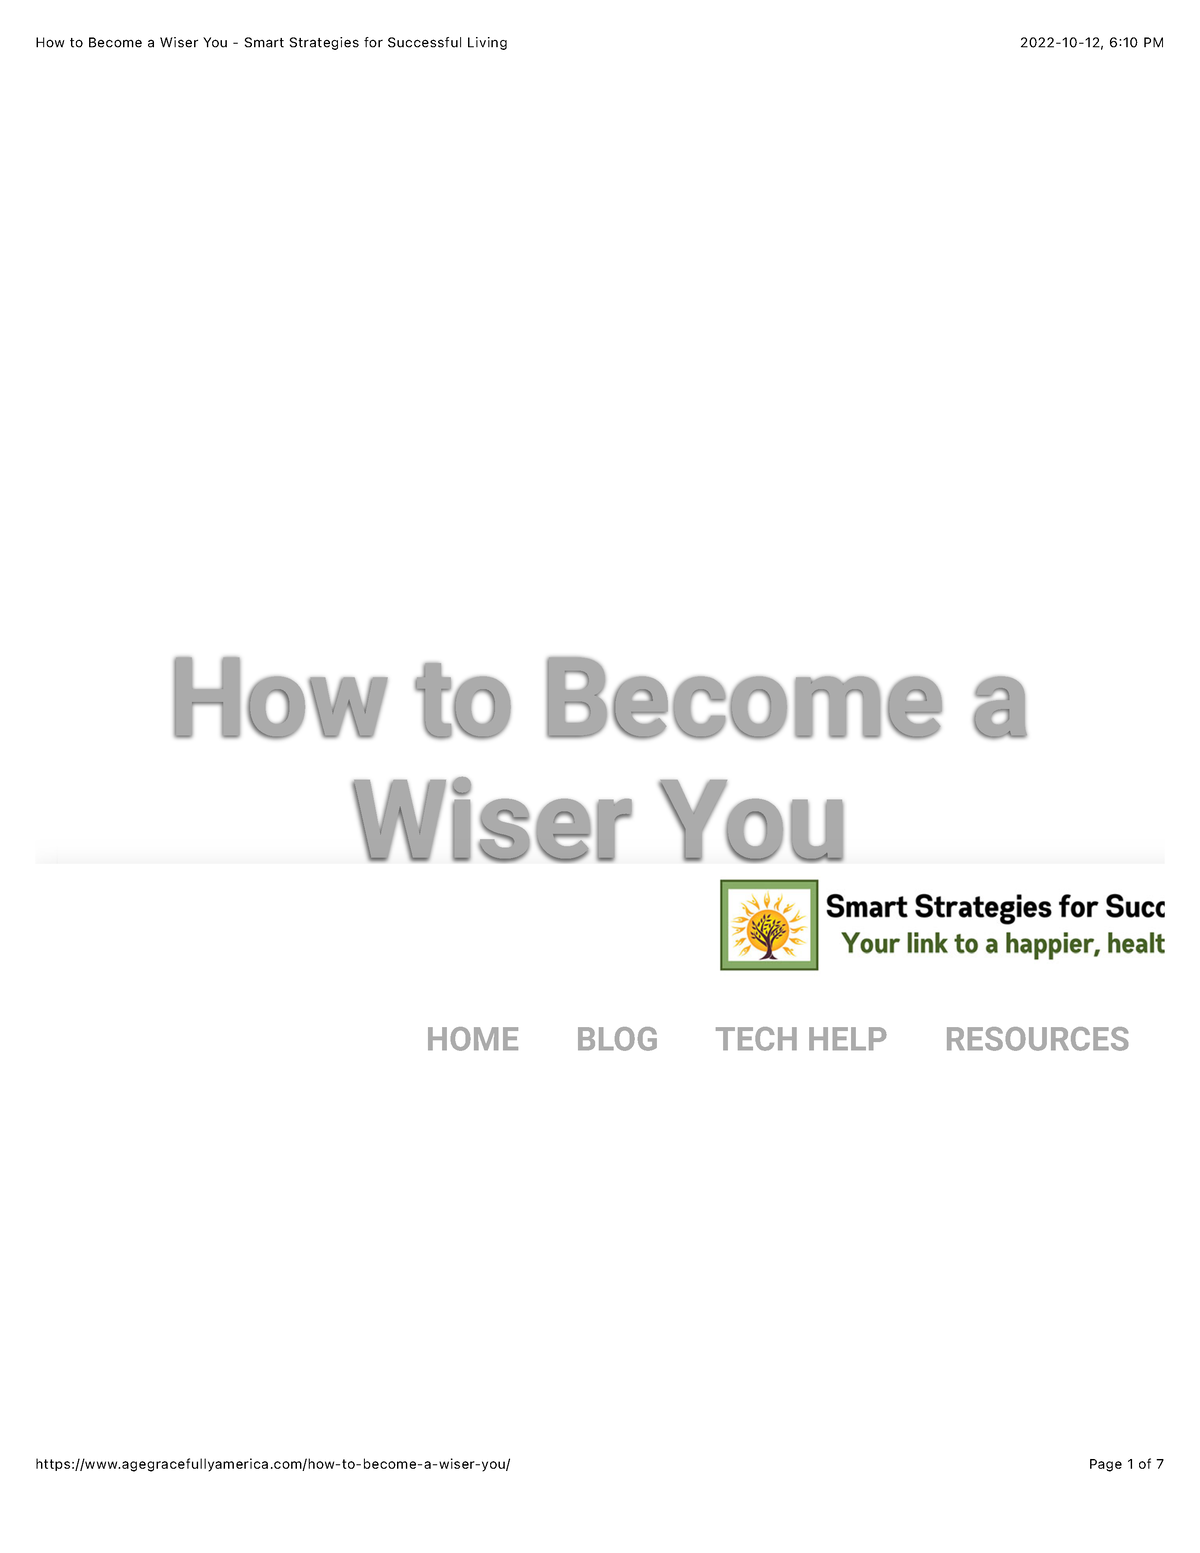 how-to-become-a-wiser-you-smart-strategies-for-successful-living